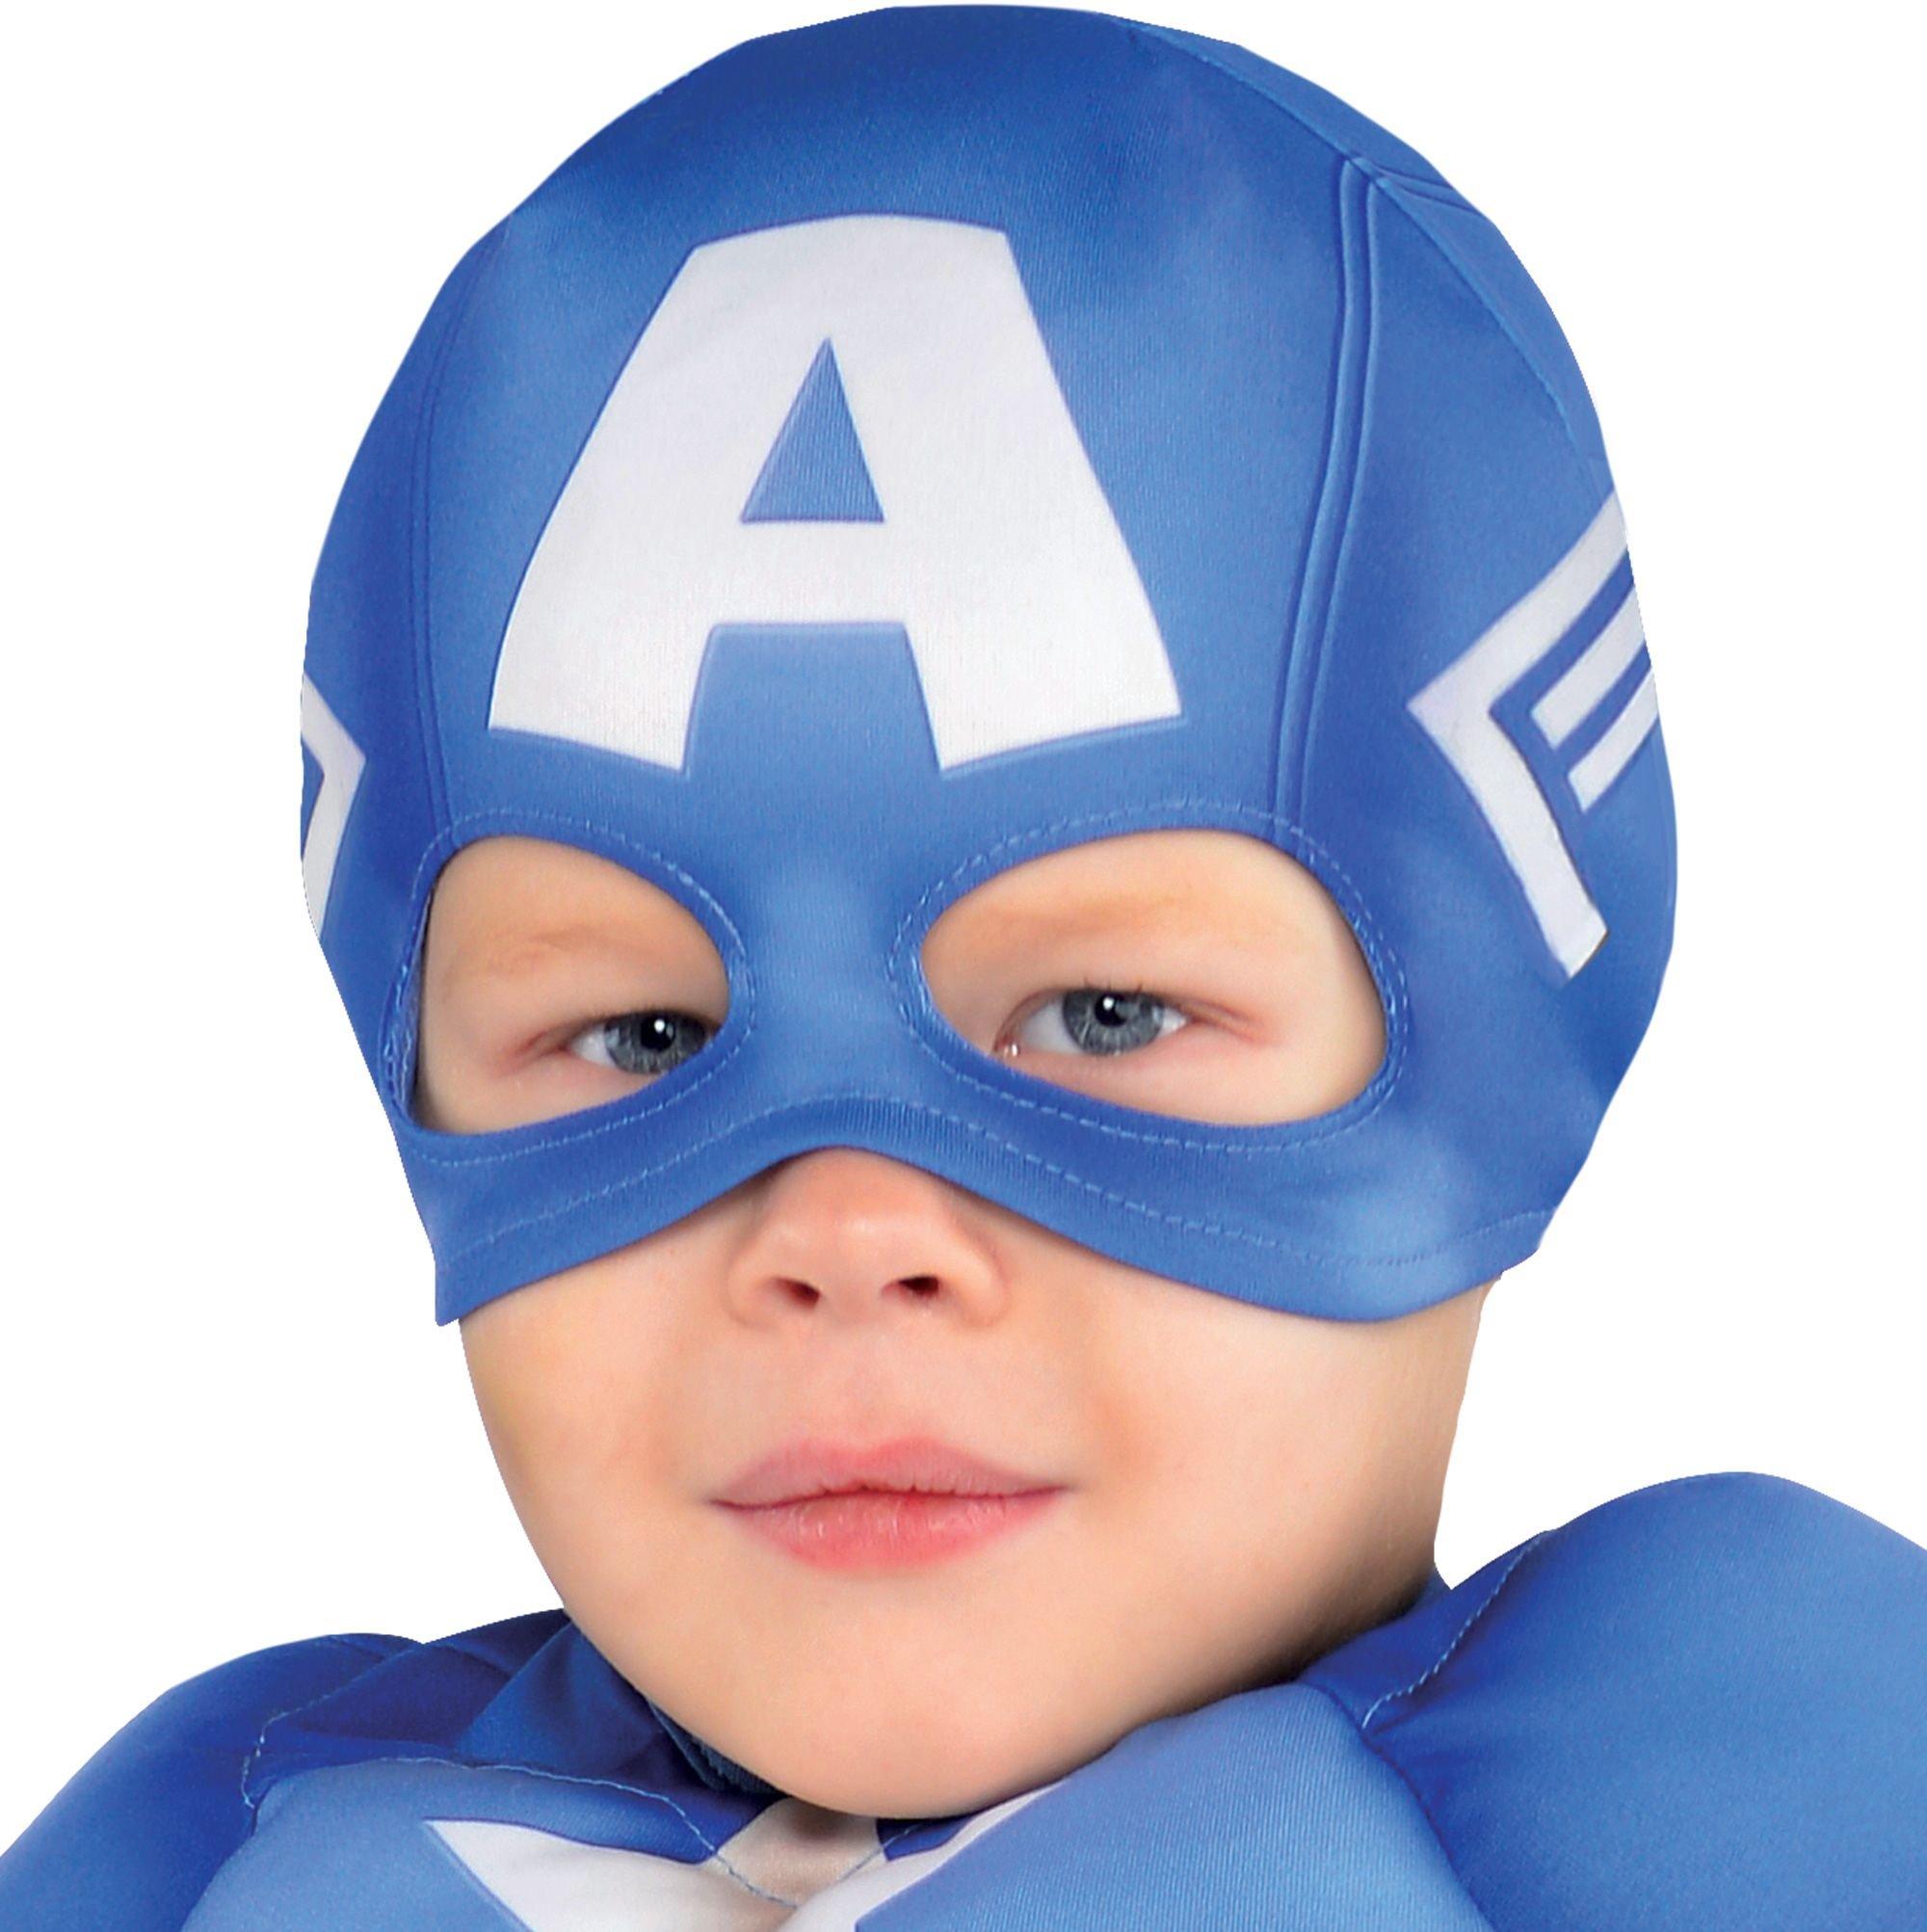 Captain America Costumes for Kids & Adults